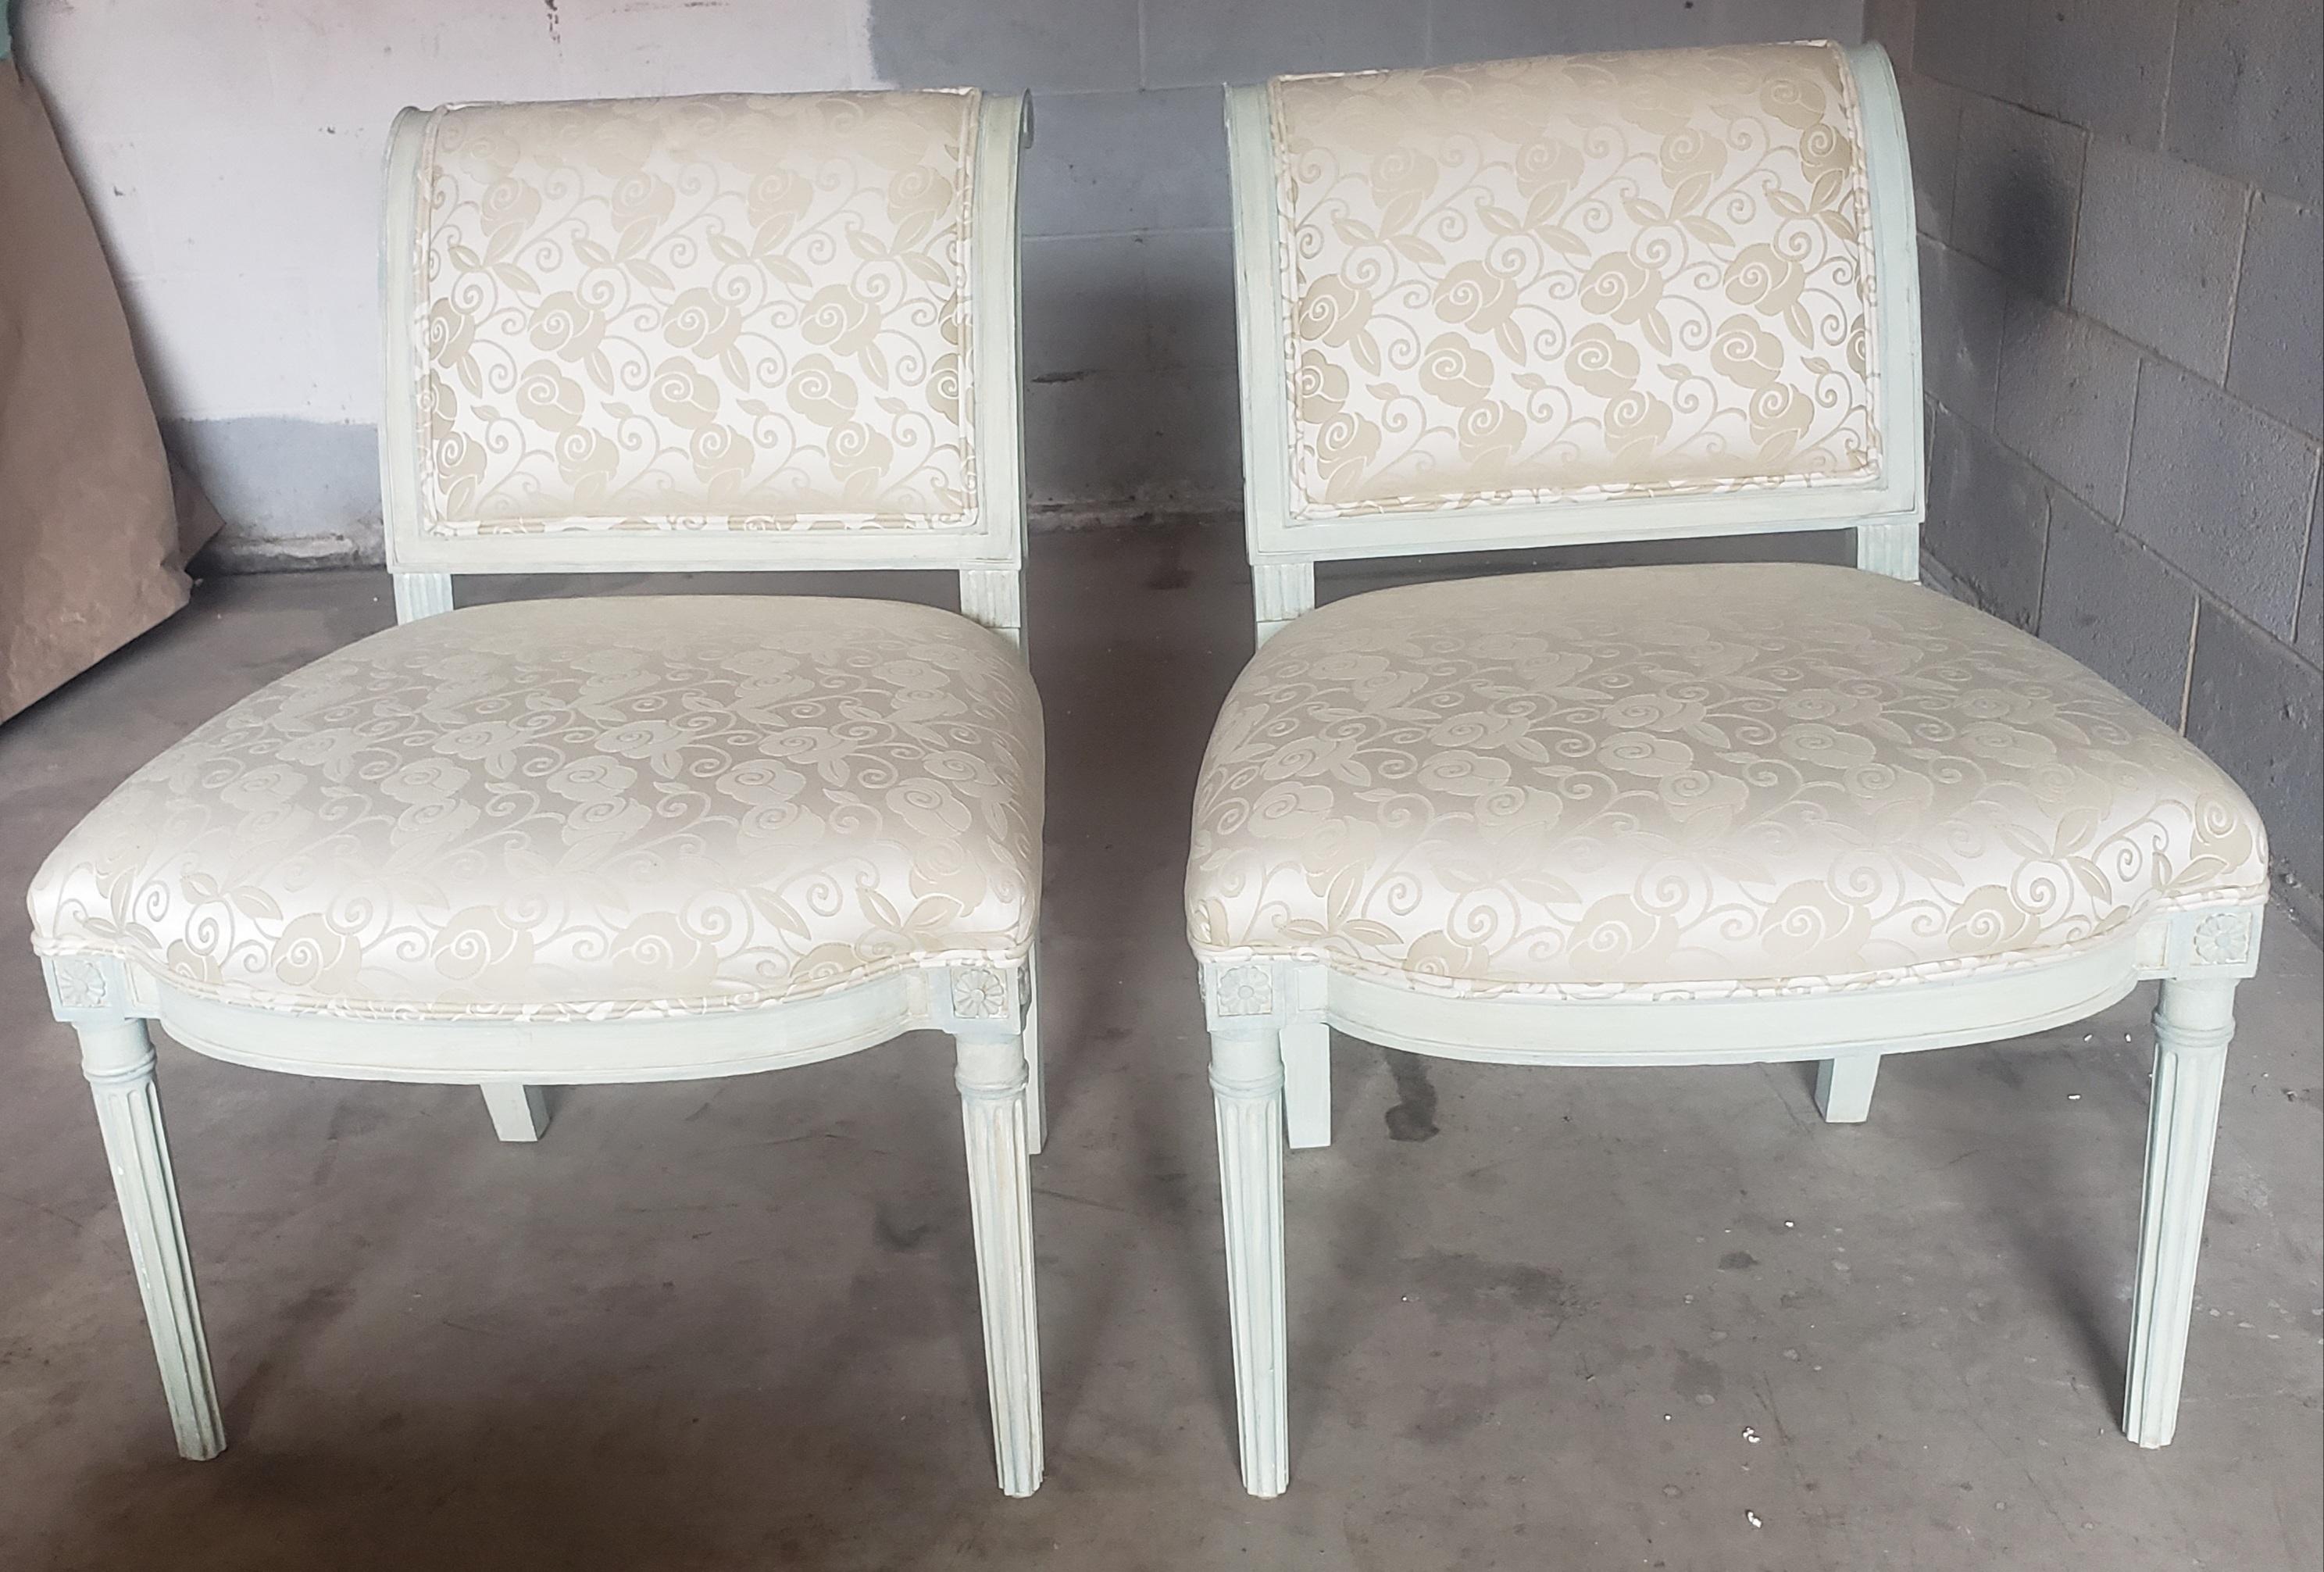 An exquisite pair of French Country Mahogany and Upholstered Slipper Lounge Chairs in excellent vintage condition. Newer High quality upholstery in excellent condition.